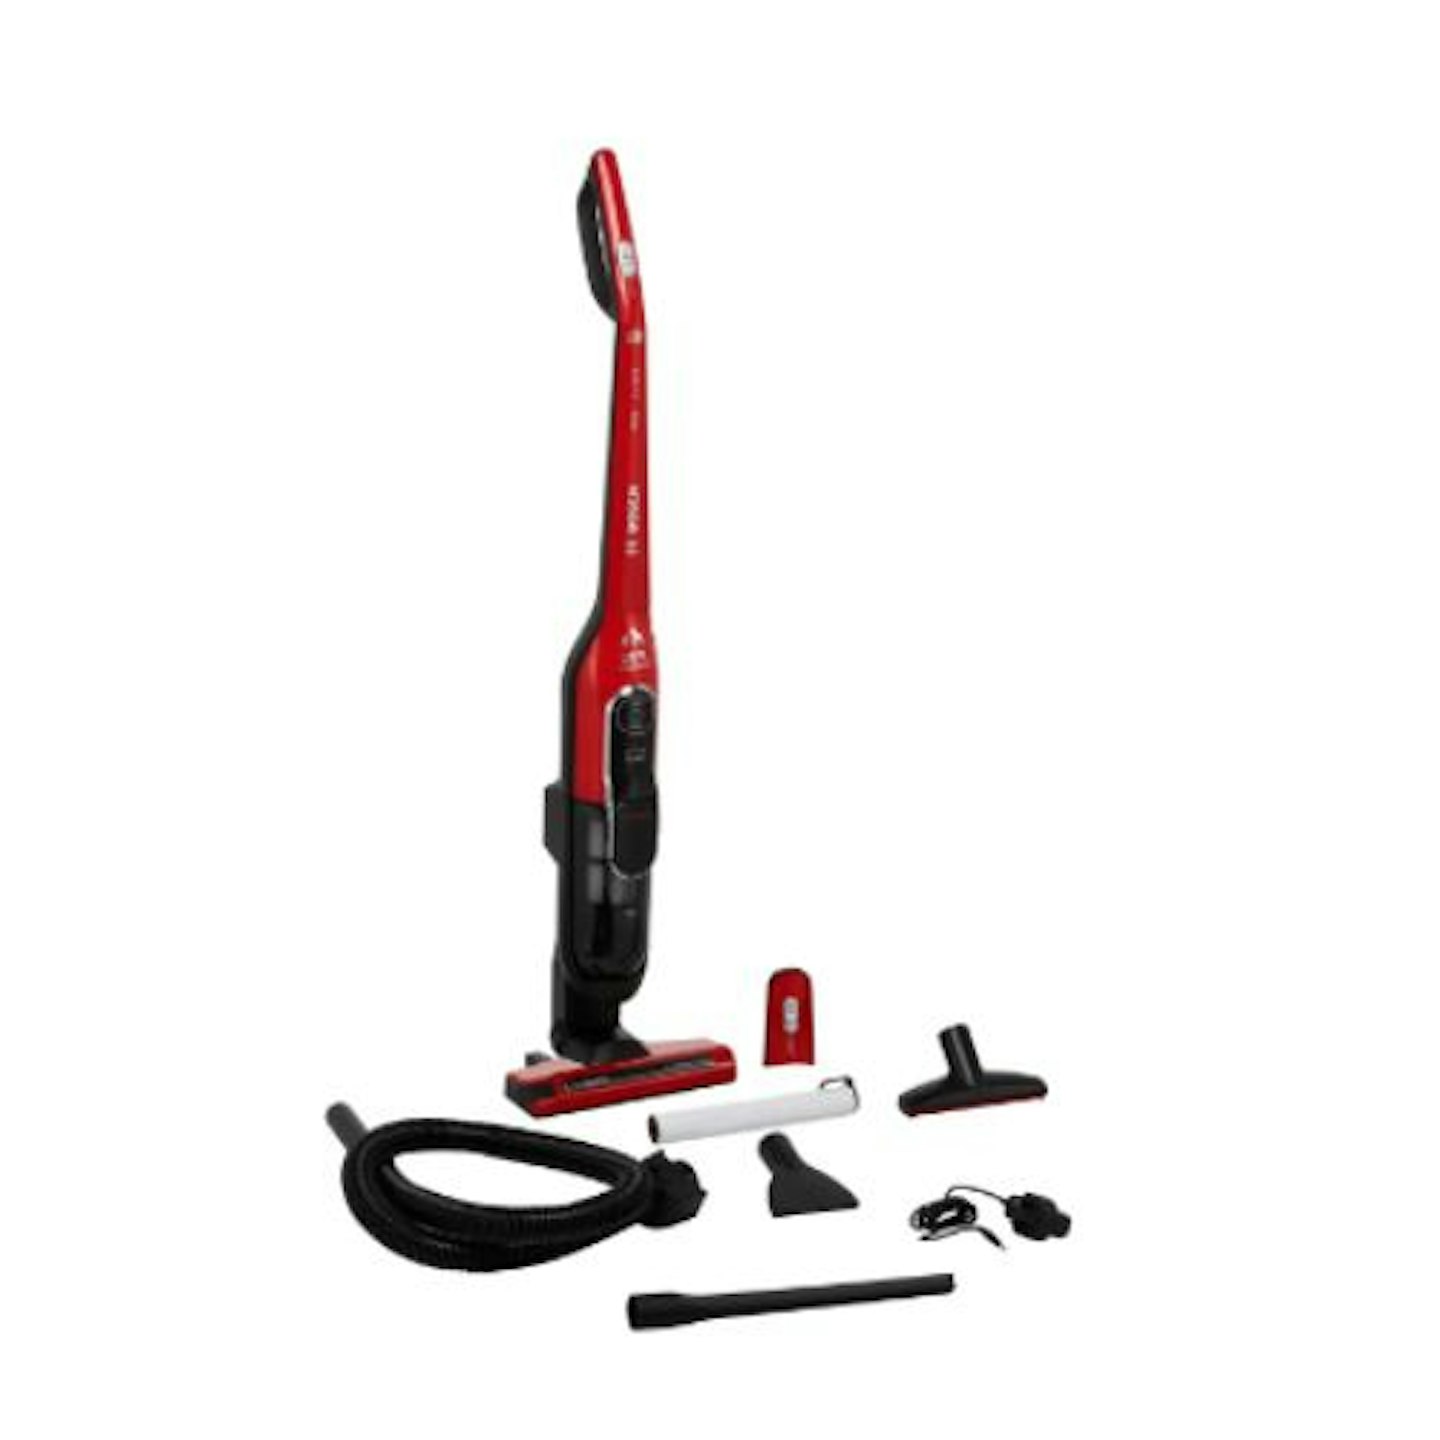 Bosch Serie 6 Athlet ProAnimal BCH86PETGB Cordless Vacuum Cleaner